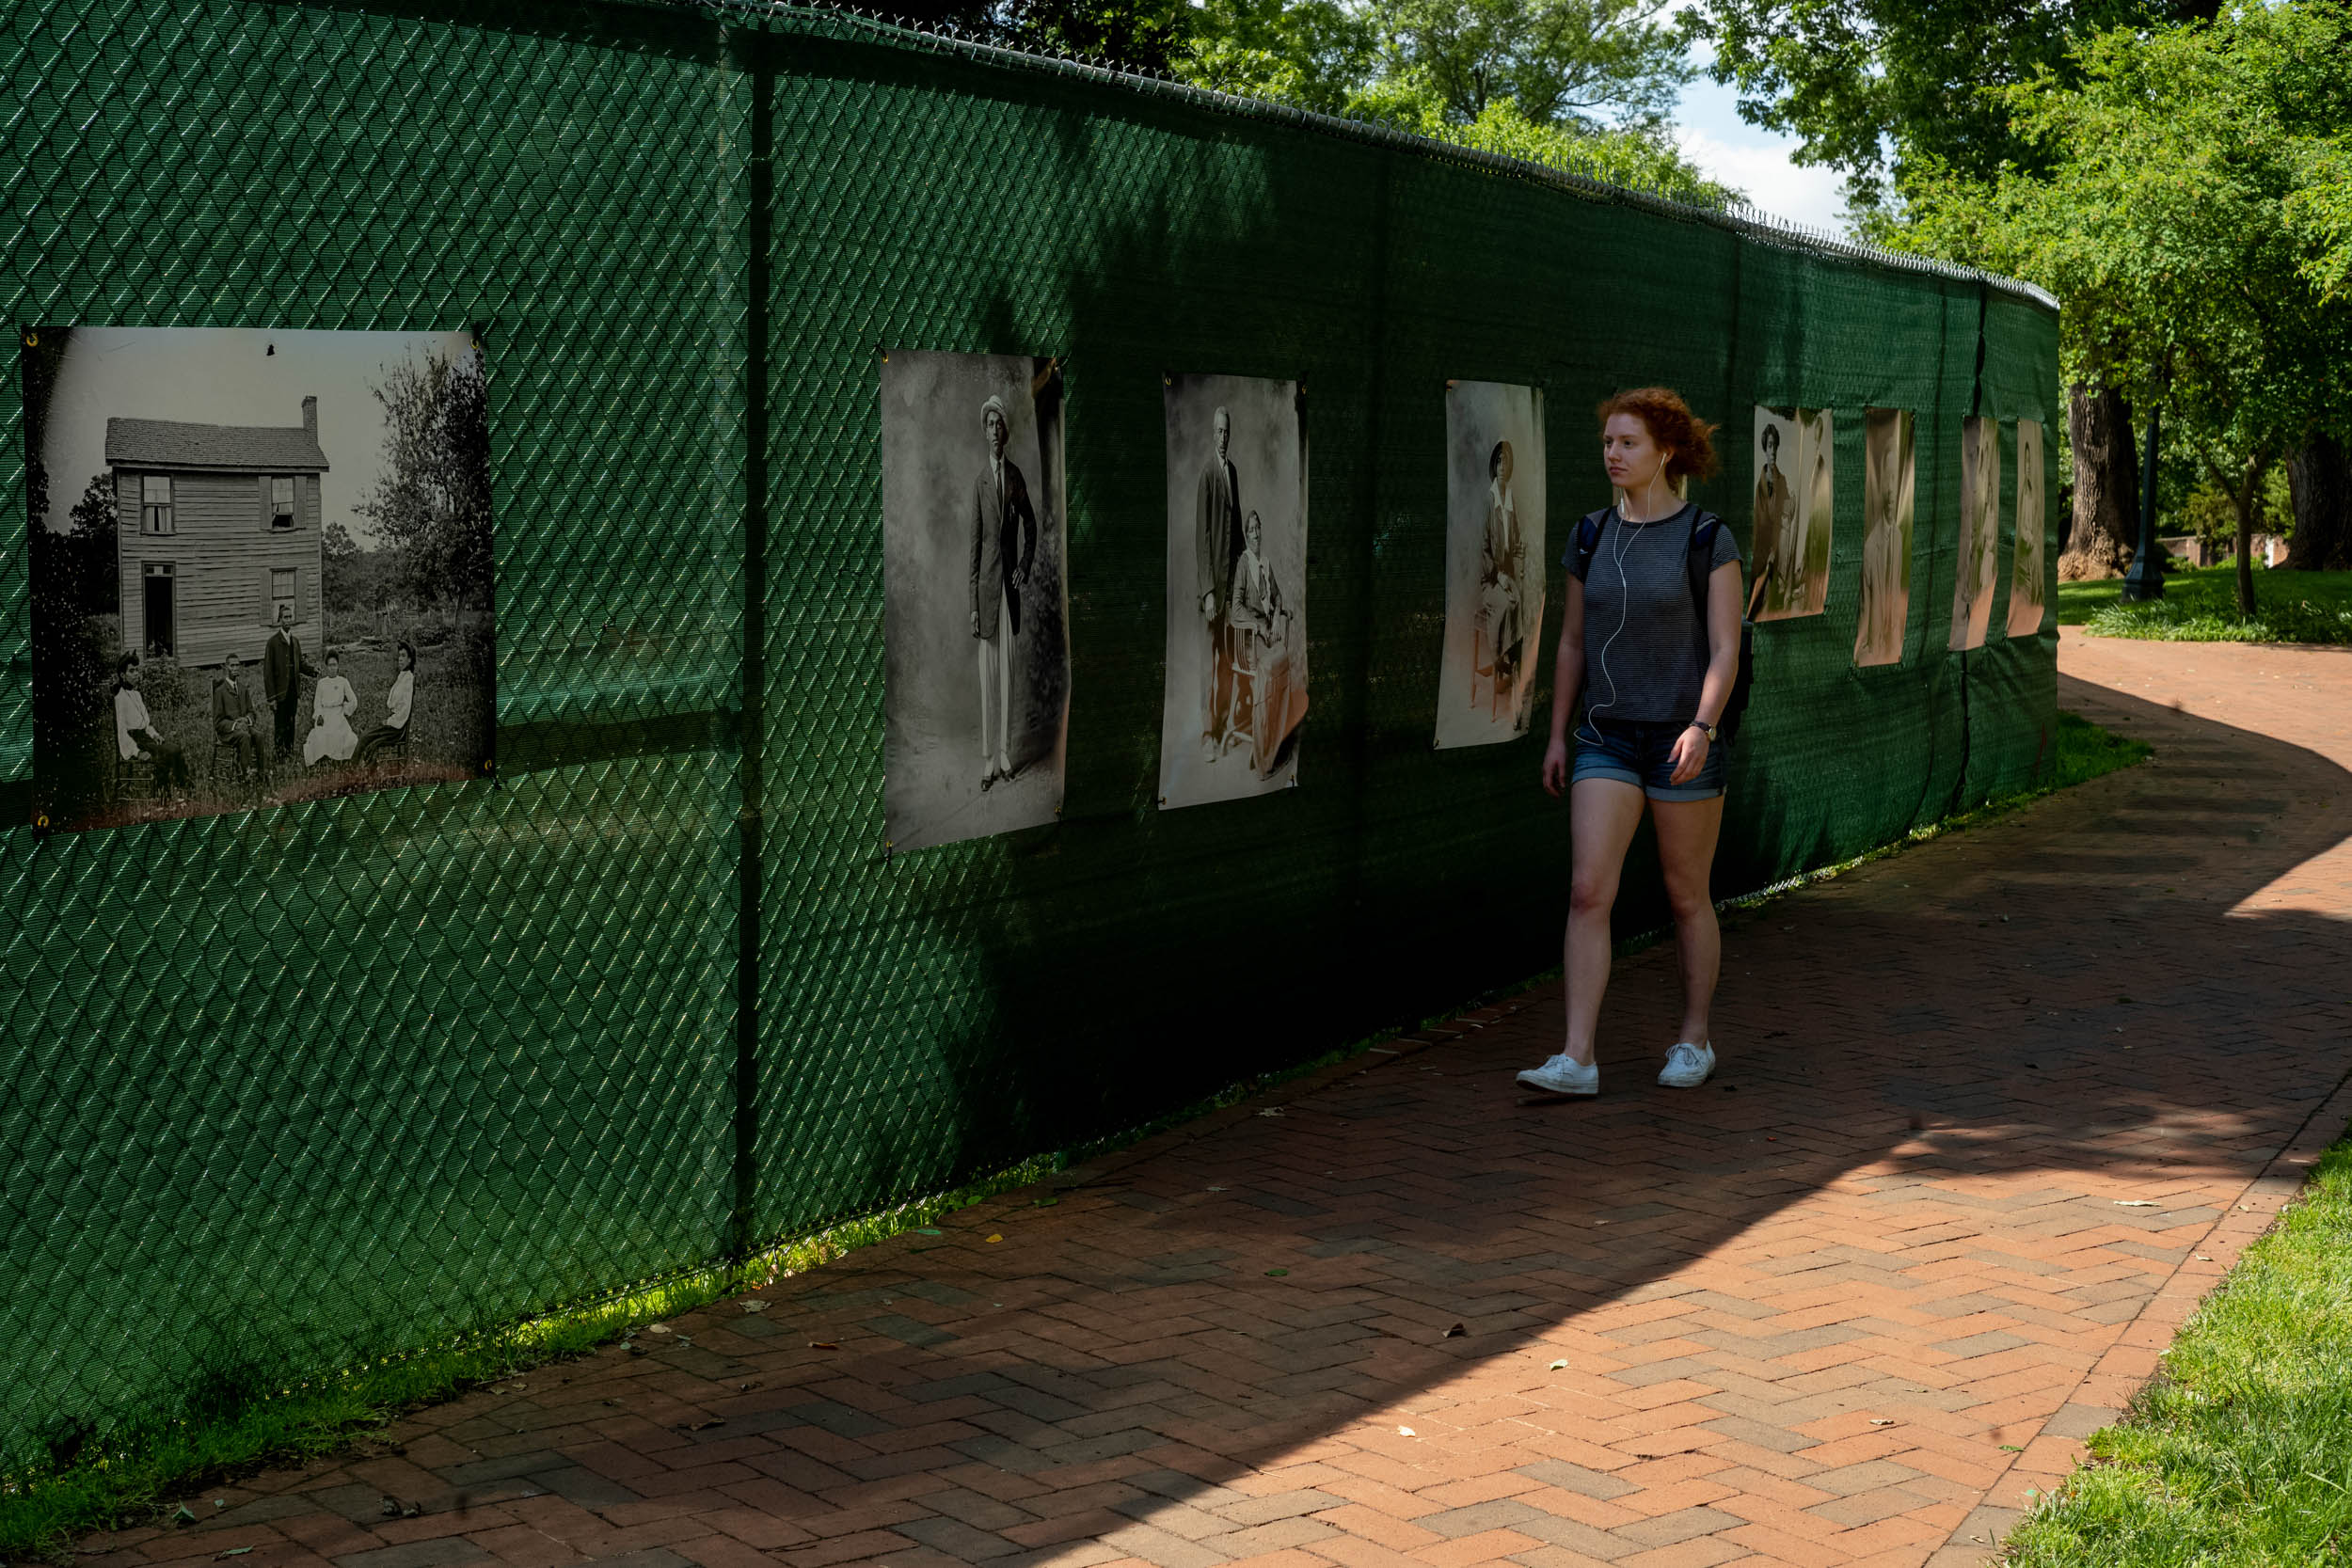 Black and white images hang from a chainlink fence as a student walks past